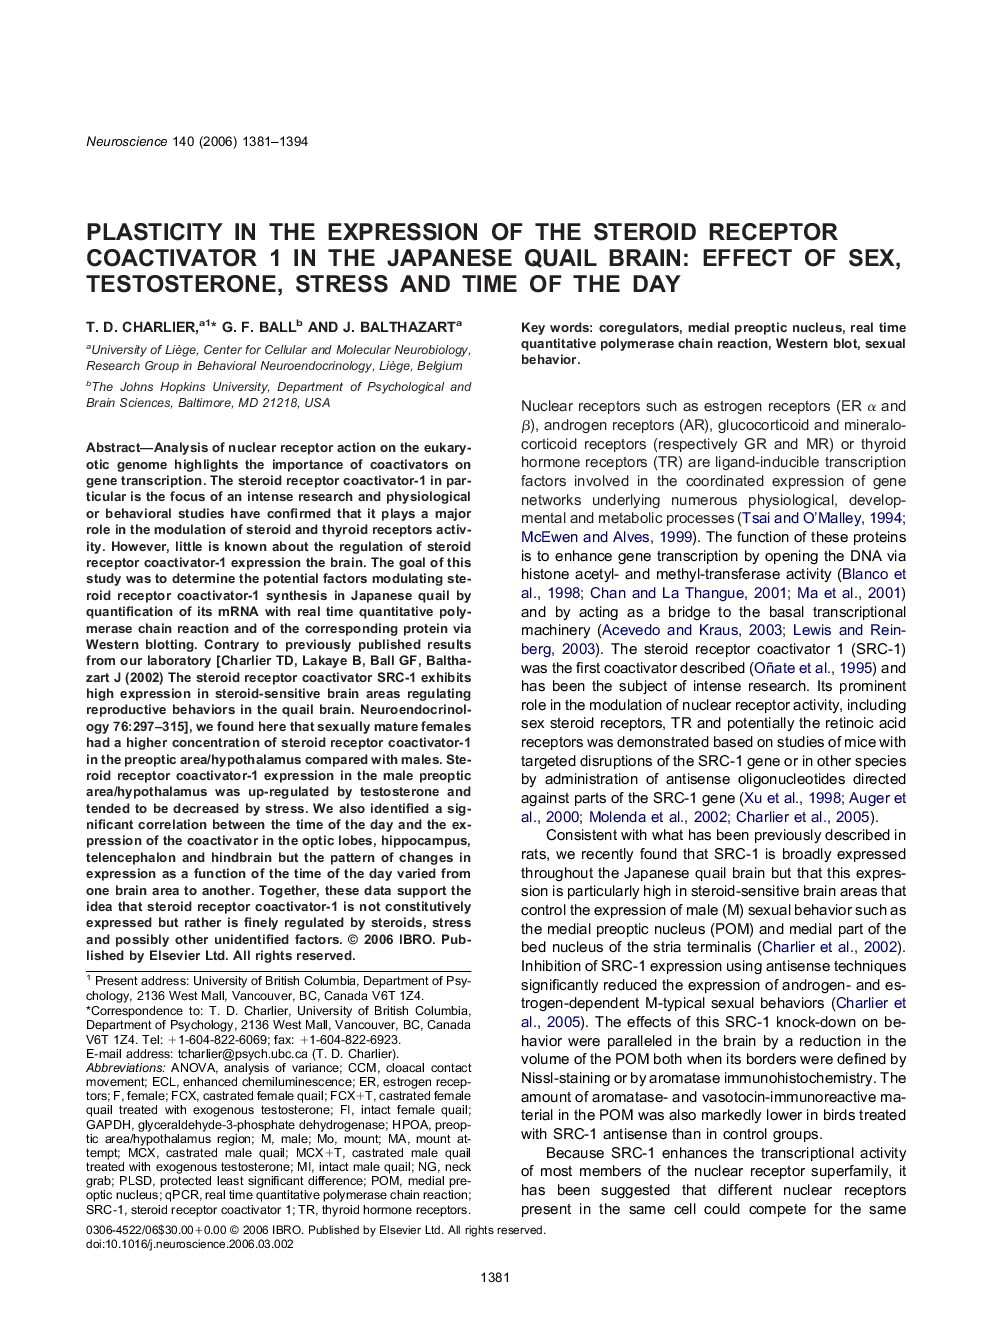 Plasticity in the expression of the steroid receptor coactivator 1 in the Japanese quail brain: Effect of sex, testosterone, stress and time of the day